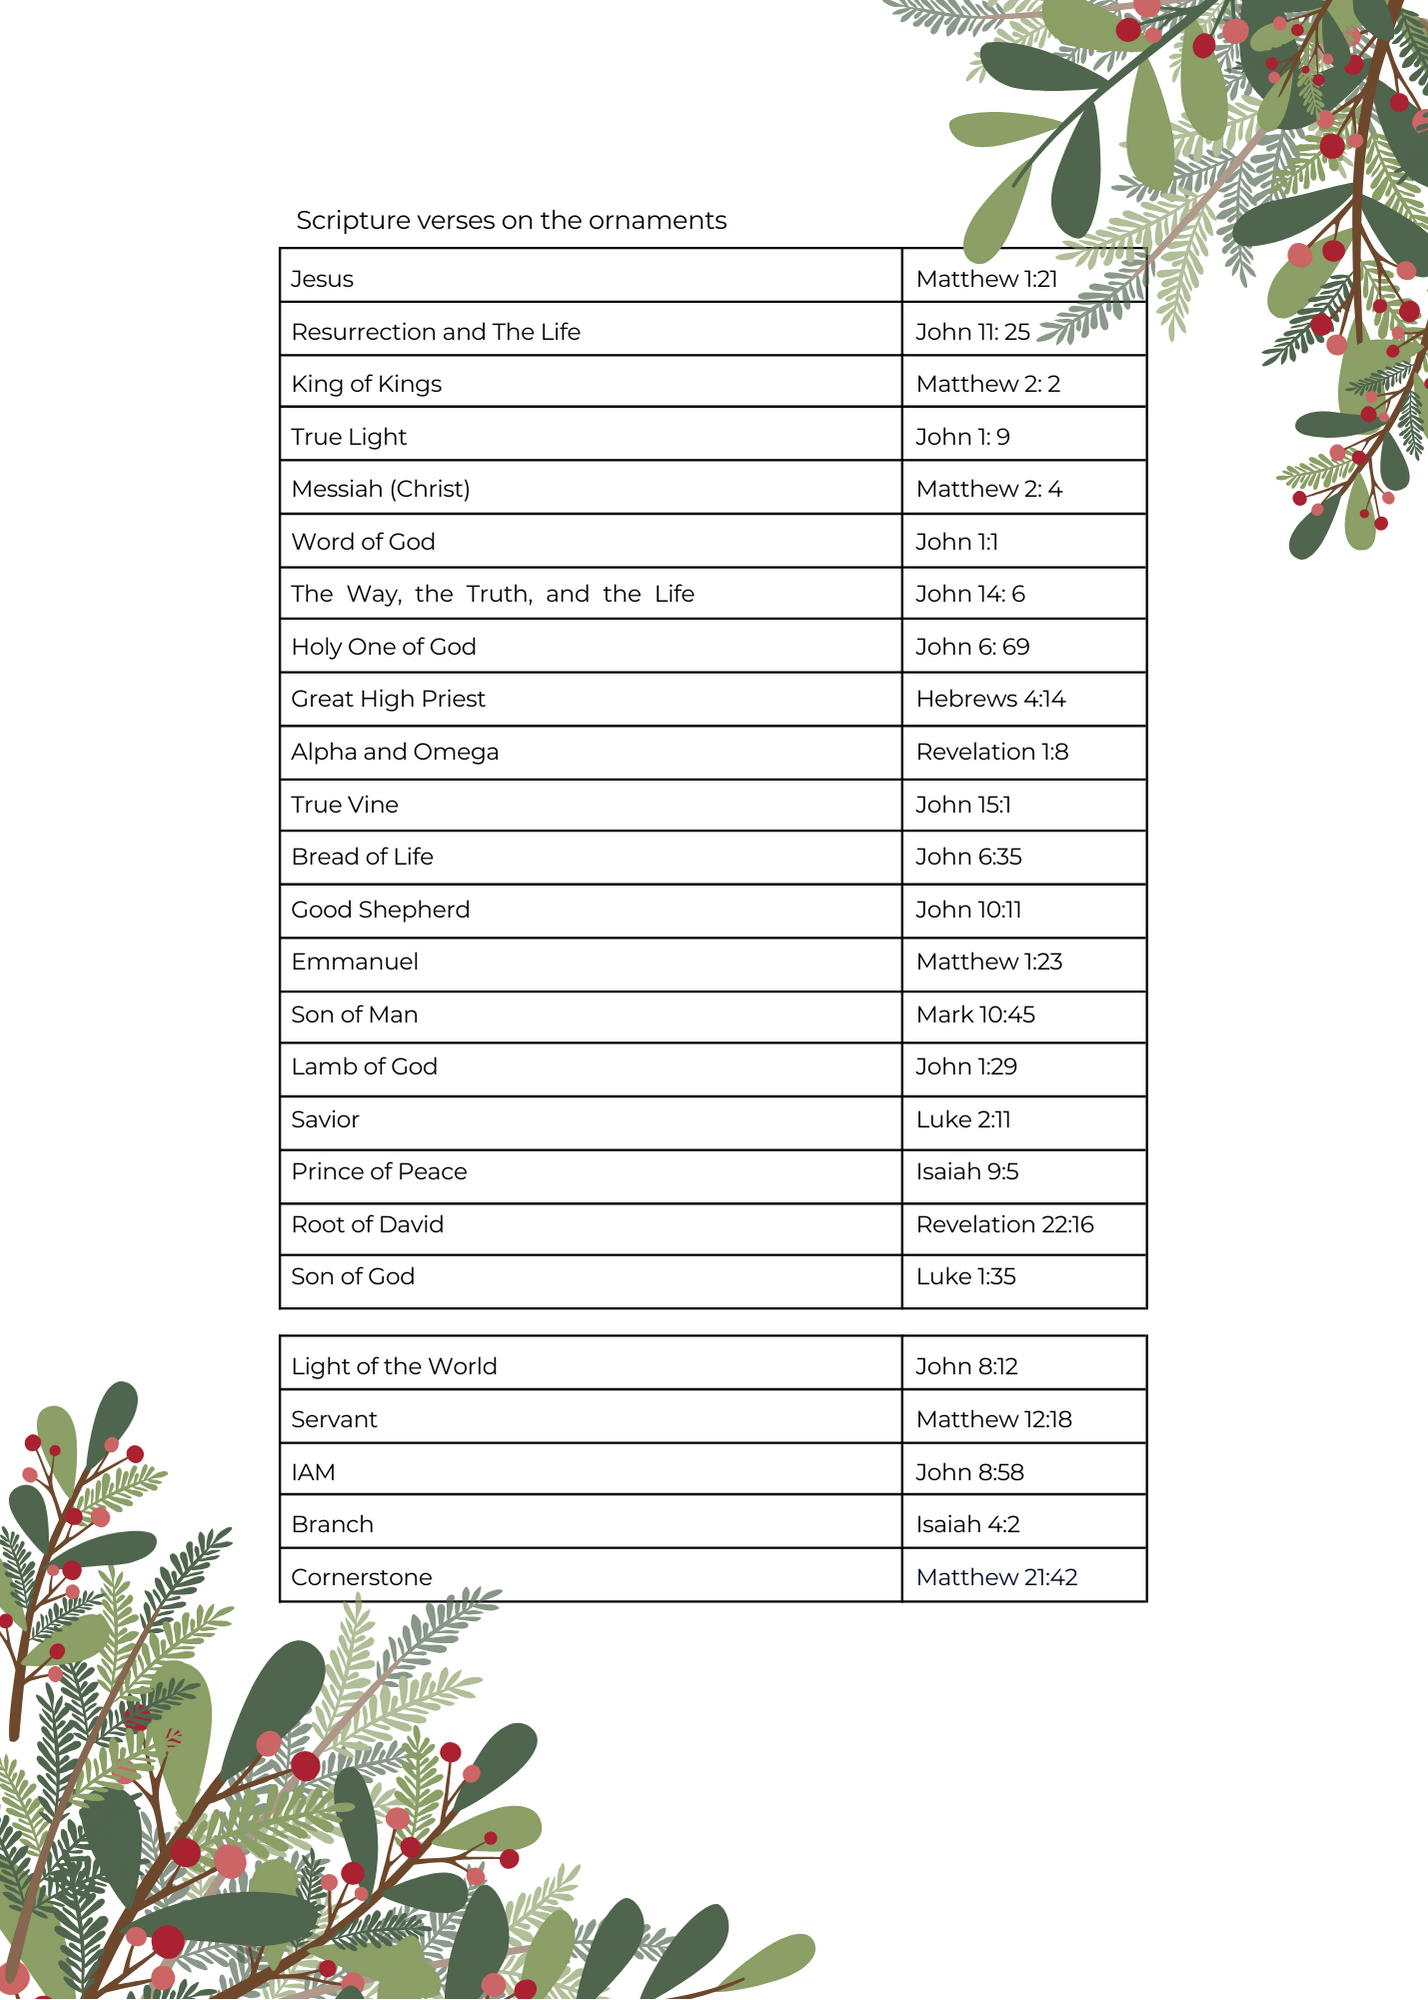 Names of Jesus 25 day Advent Devotional for Catholic Kids 75 page Digital Download Printable